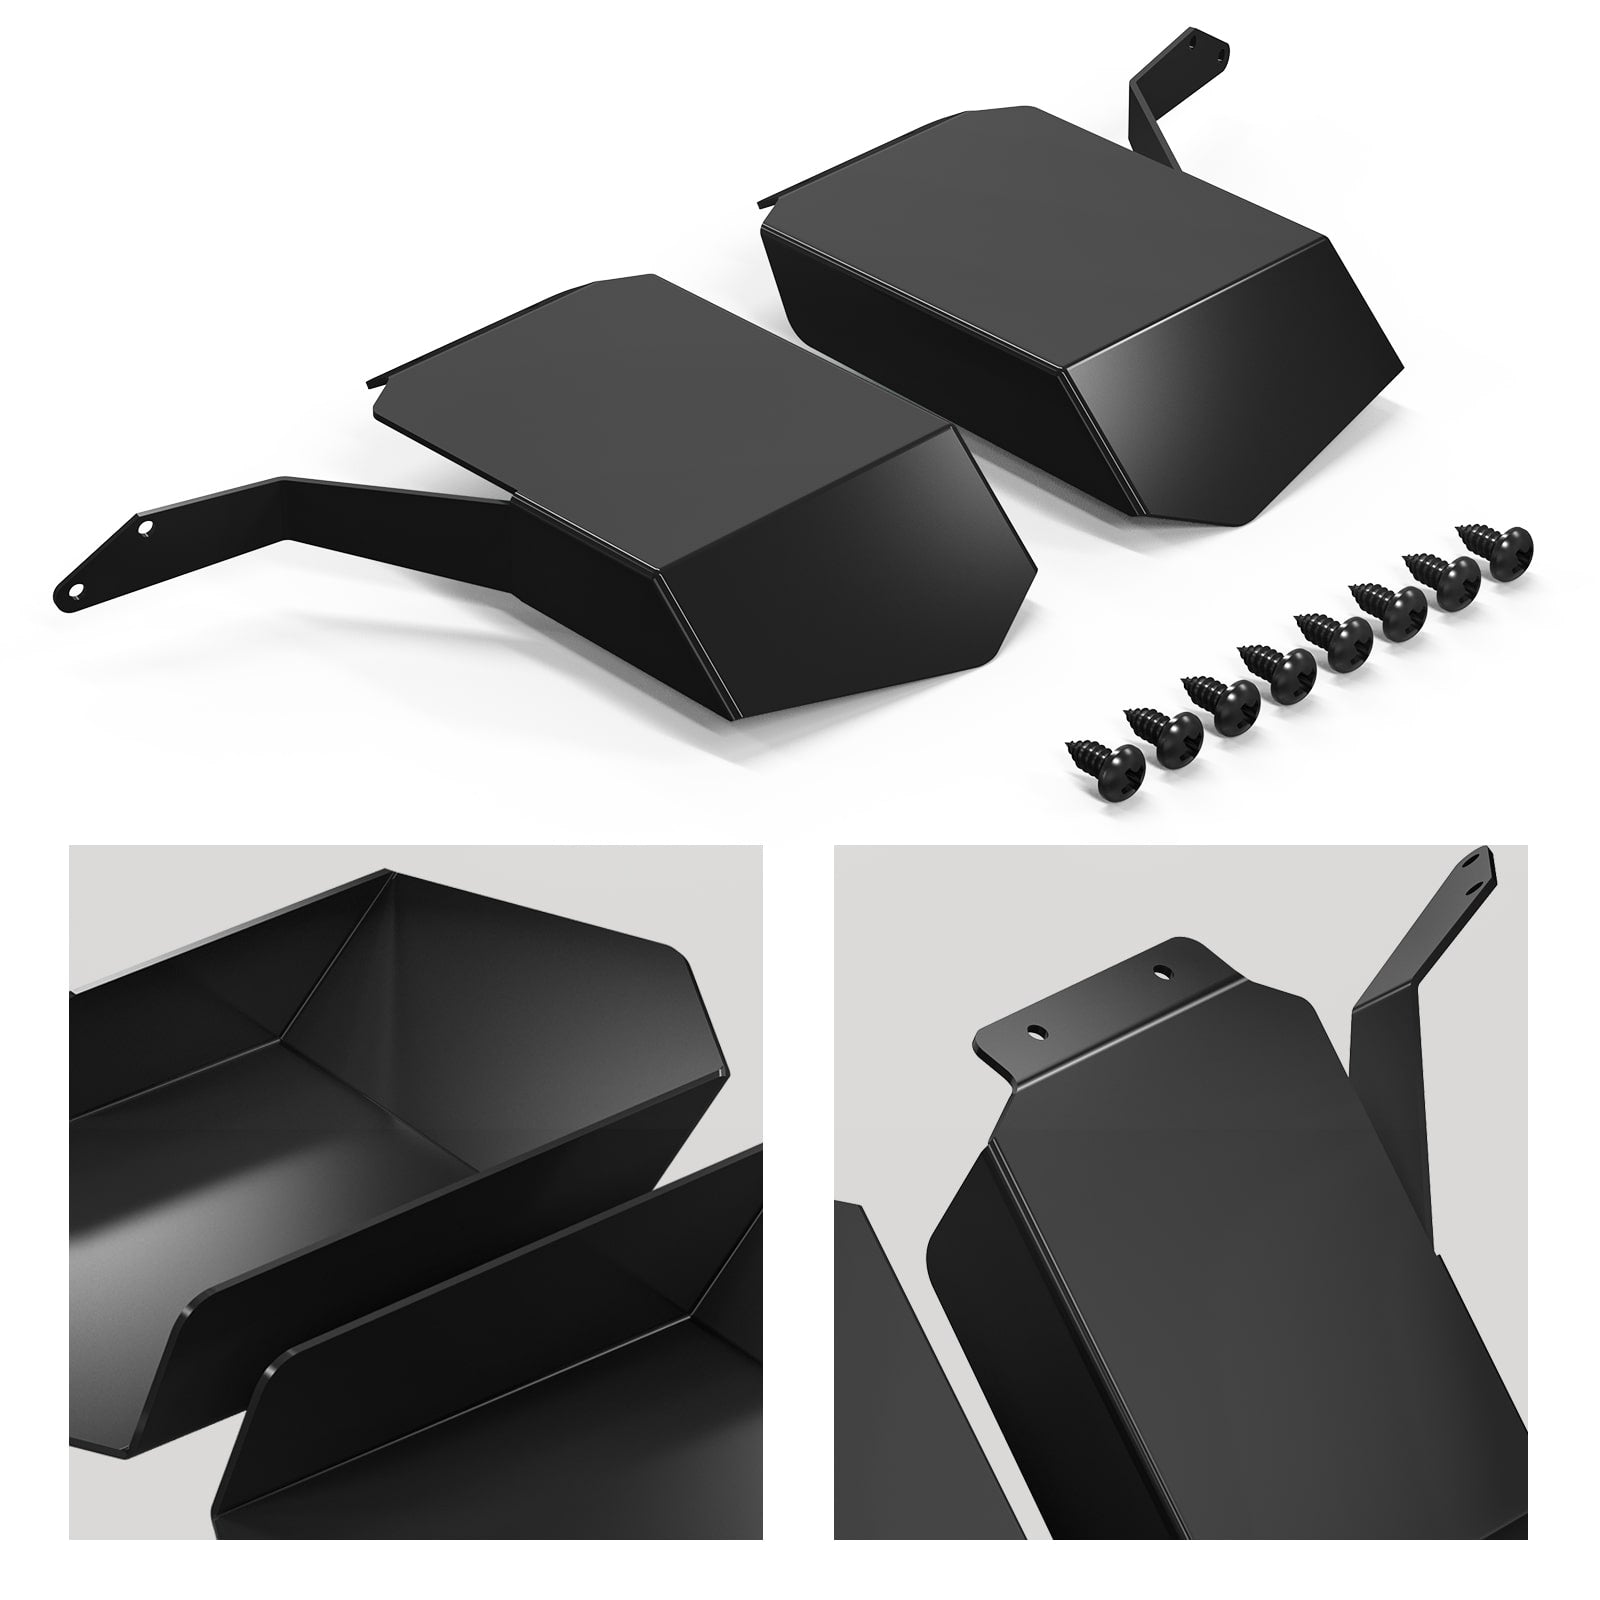 Dynamic Air Induction Intake Scoops for BMW E60 E61 2004-2009